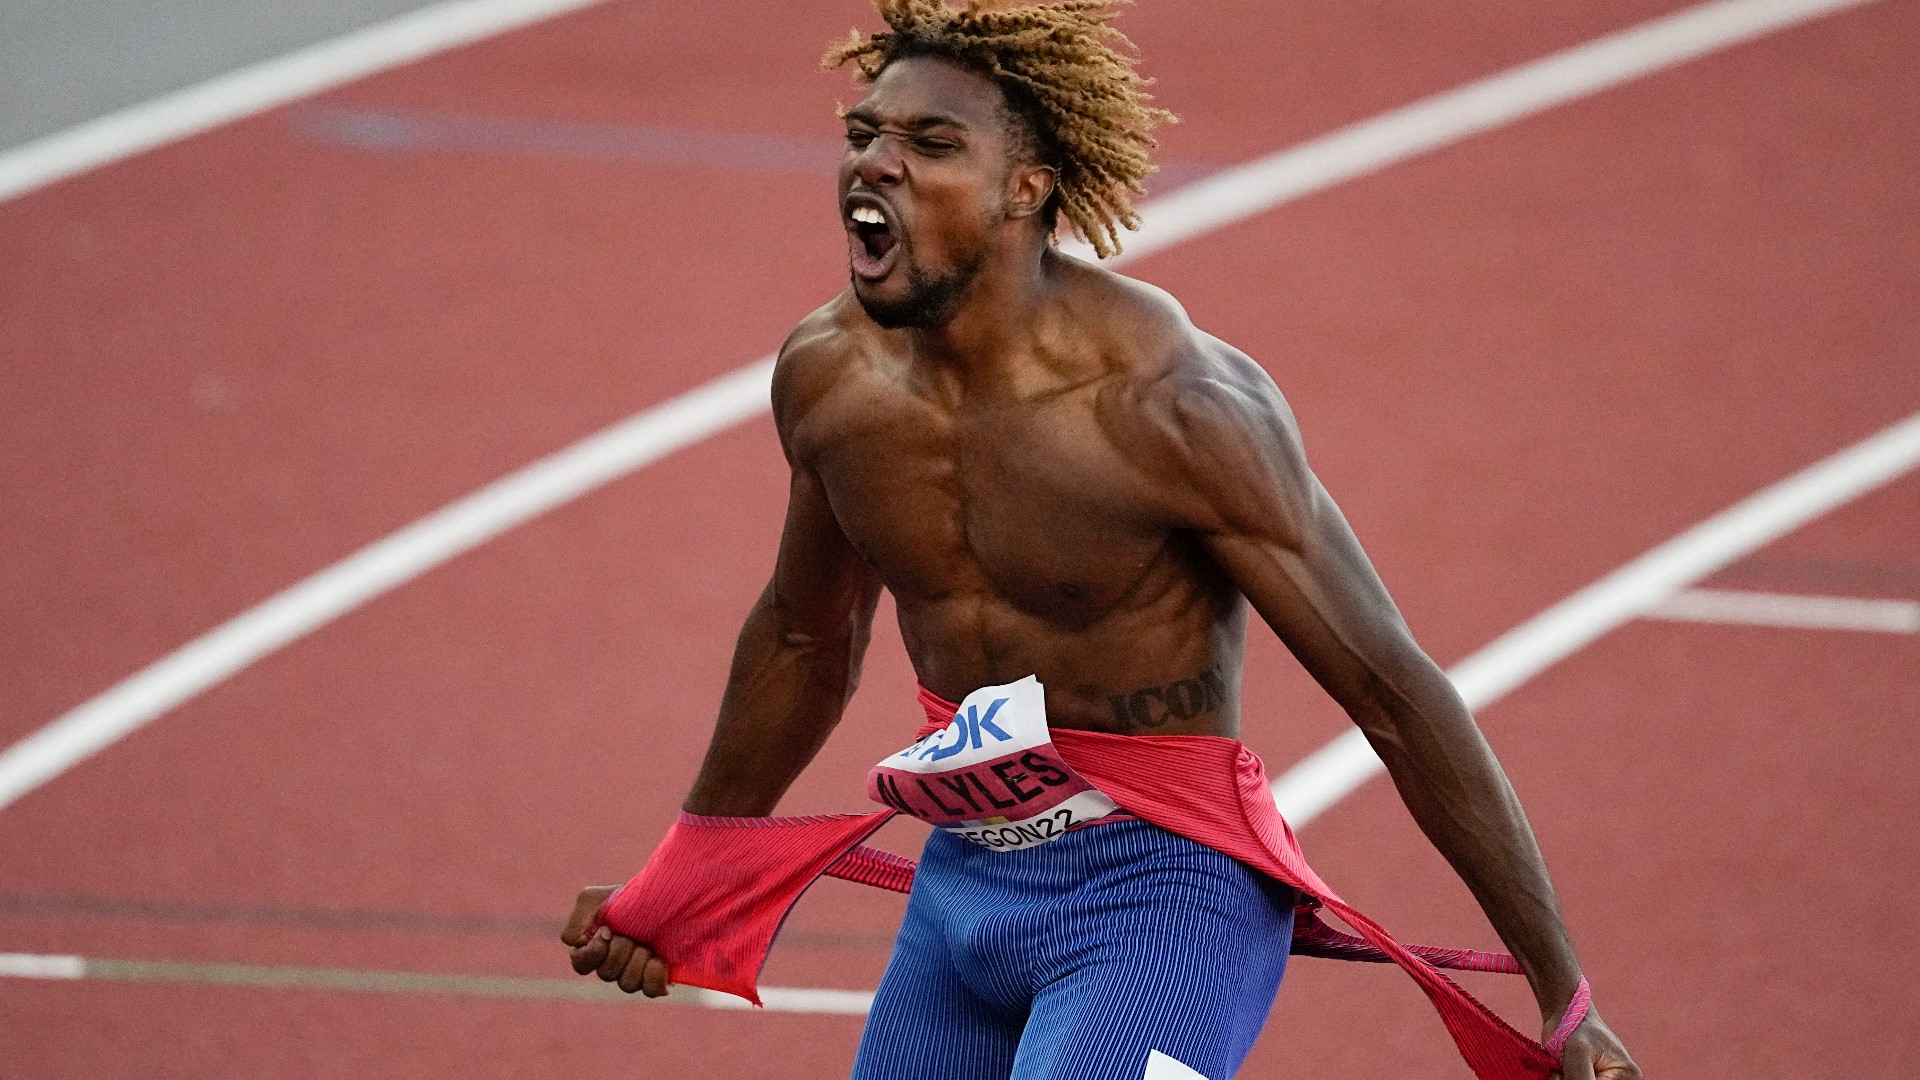 An Alexandria track star breaks a 26-year-old American record at World Athletics Championships.